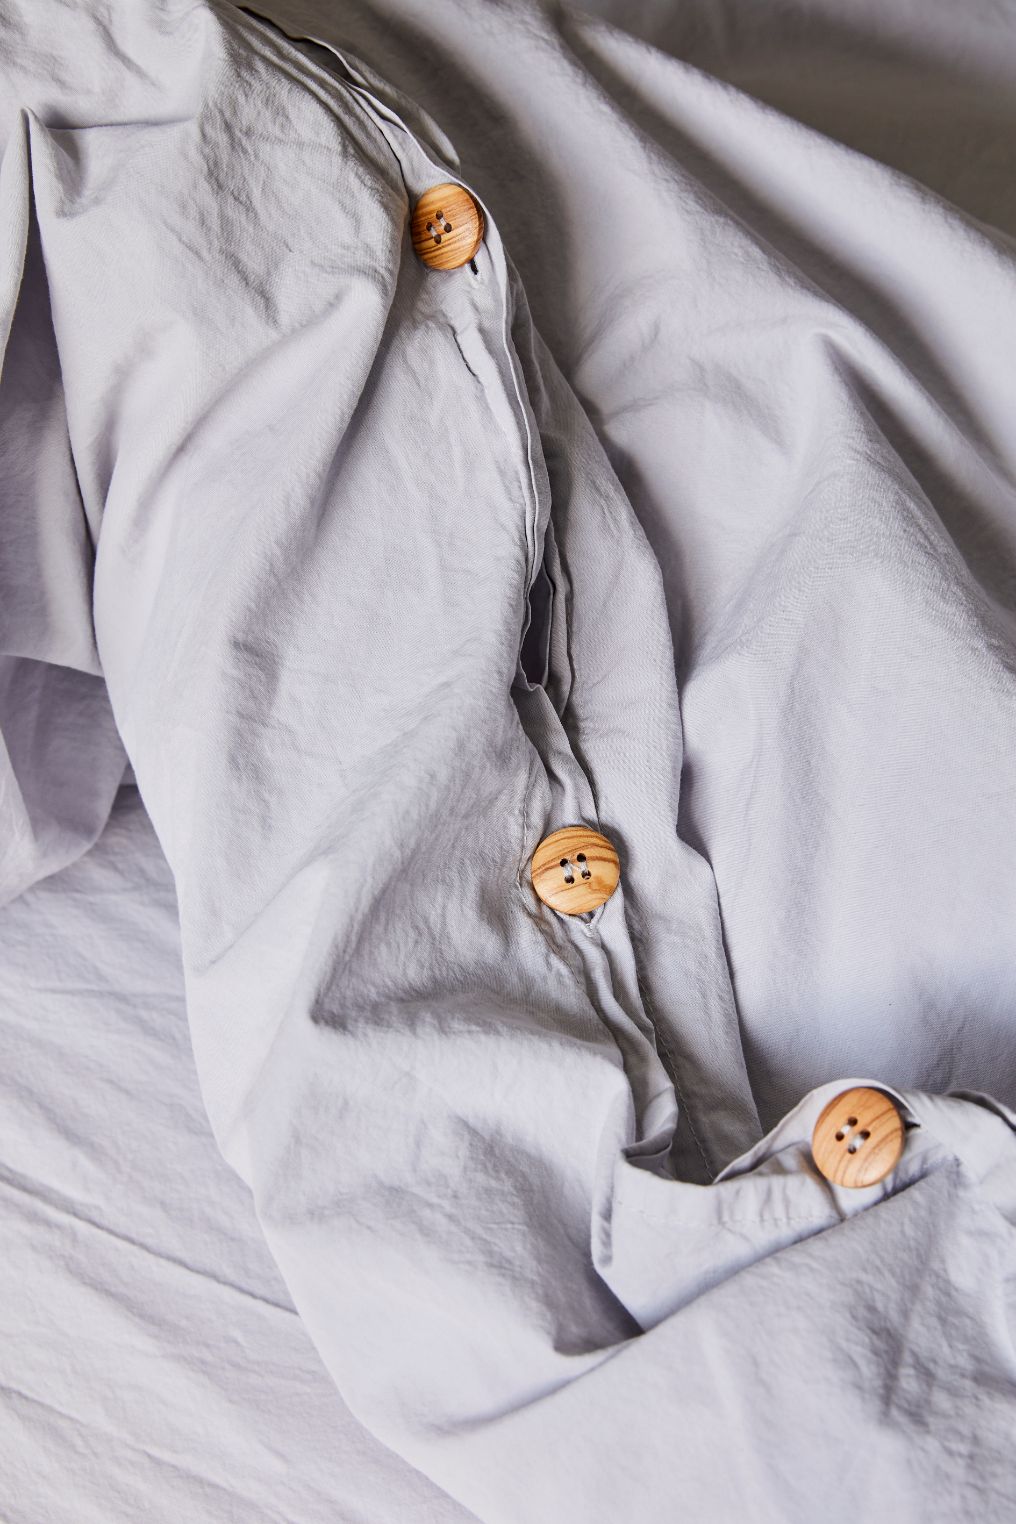 What Is a Duvet Cover & How Does it Work?